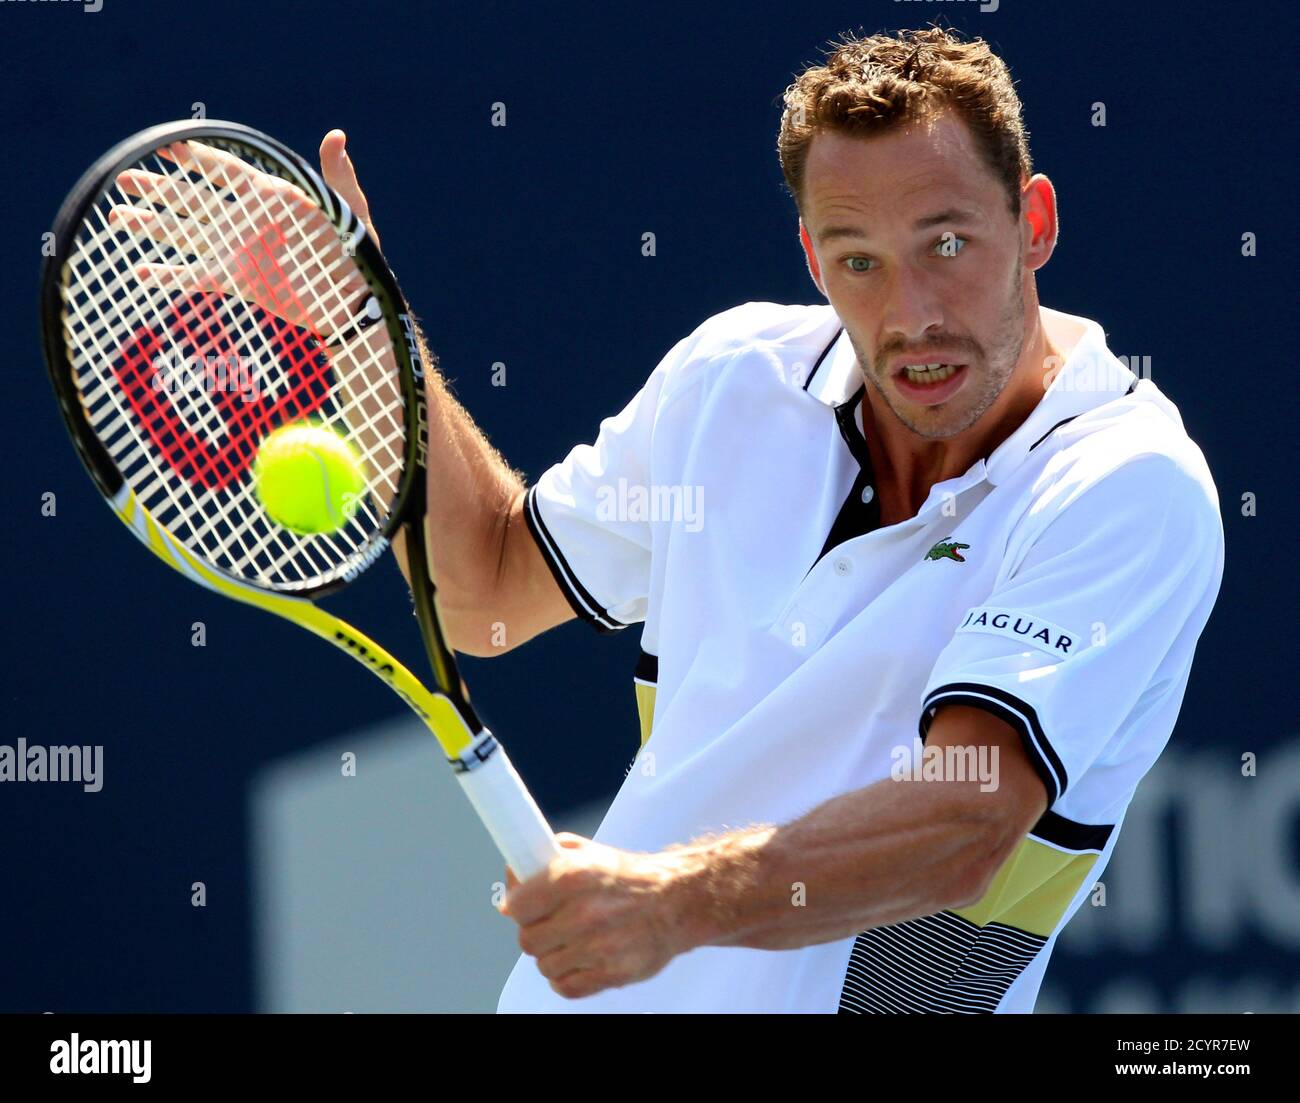 Michael Llodra of France returns a backhand against Roger Federer of  Switzerland during their match at